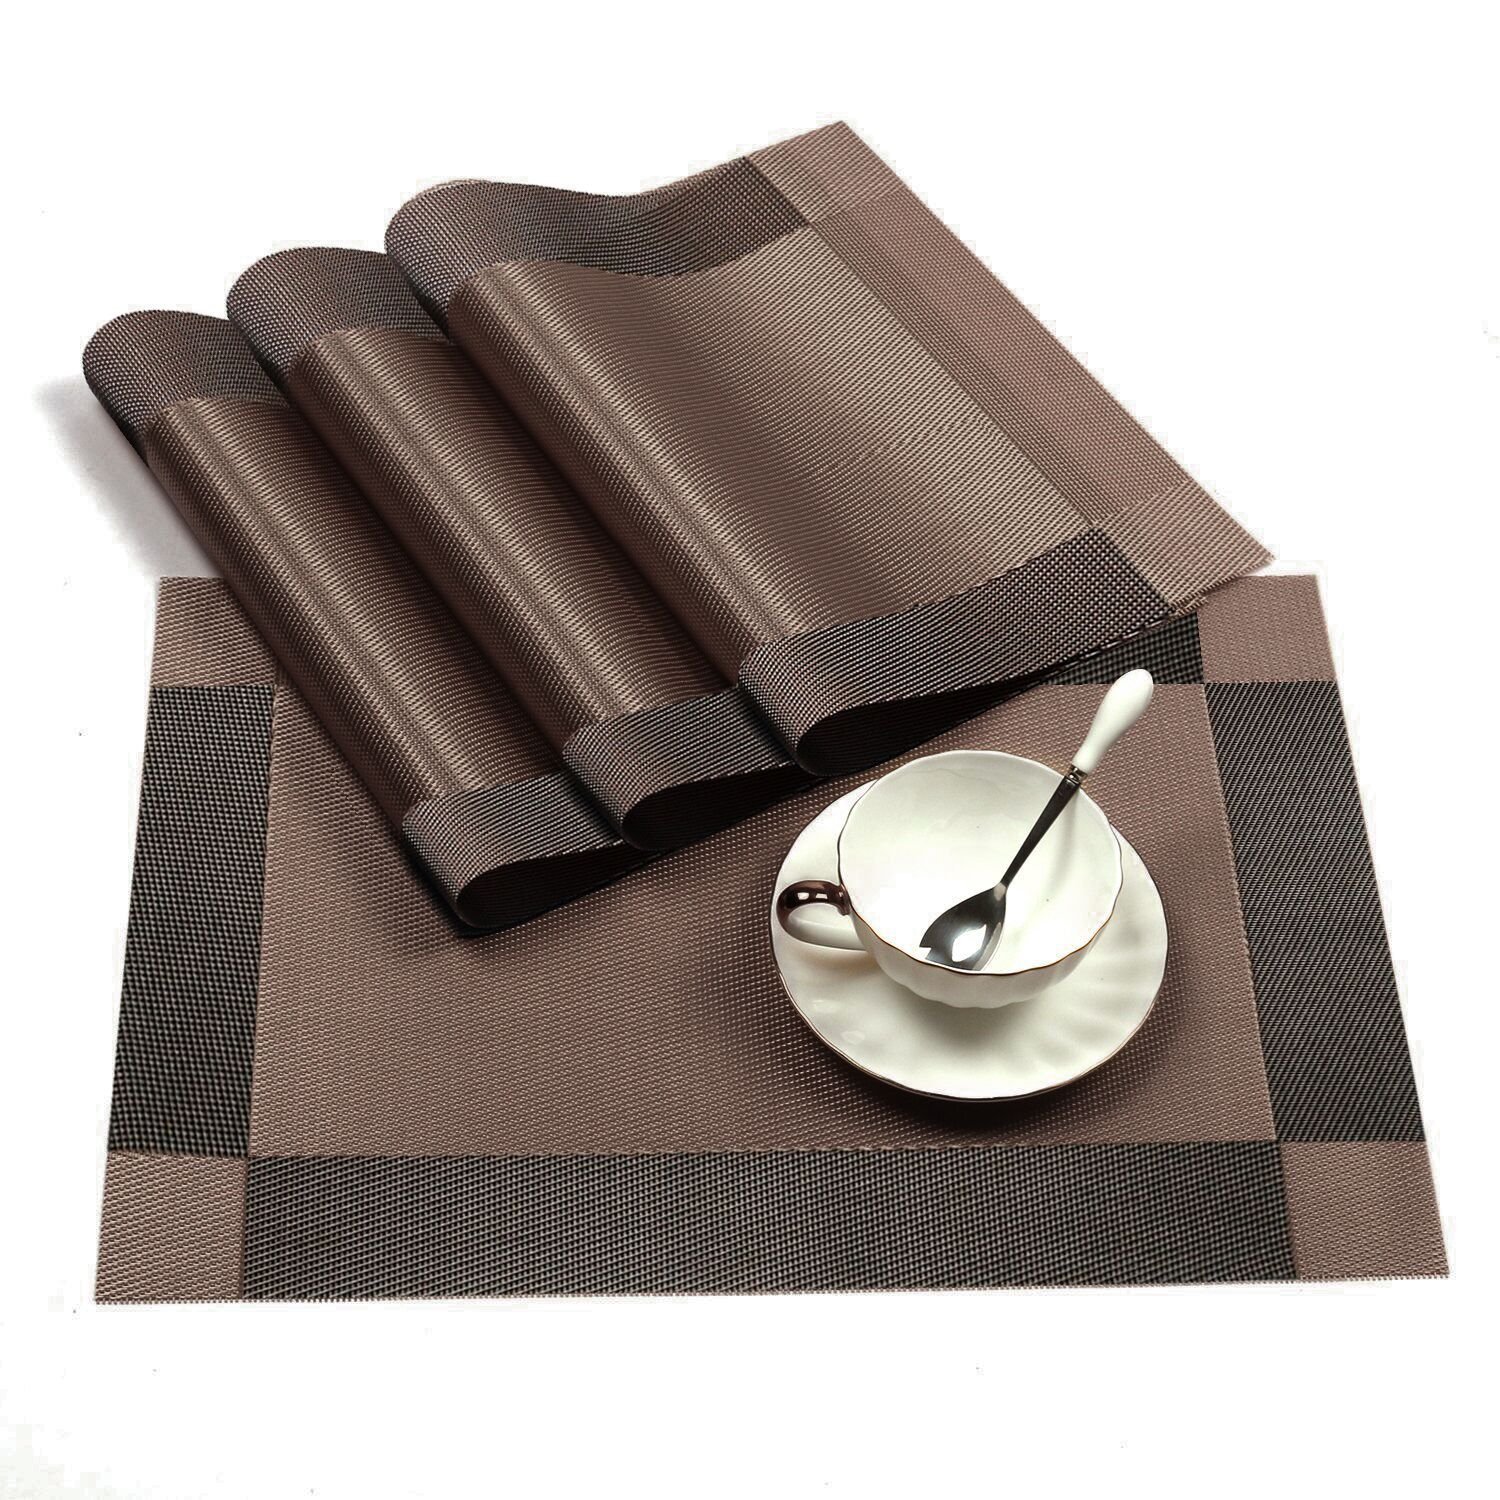 VIKROM 2 Pack Of Silicone Mini Cake Baking Molds & Set of 8 Elegant Brown Placemats for Dining Table